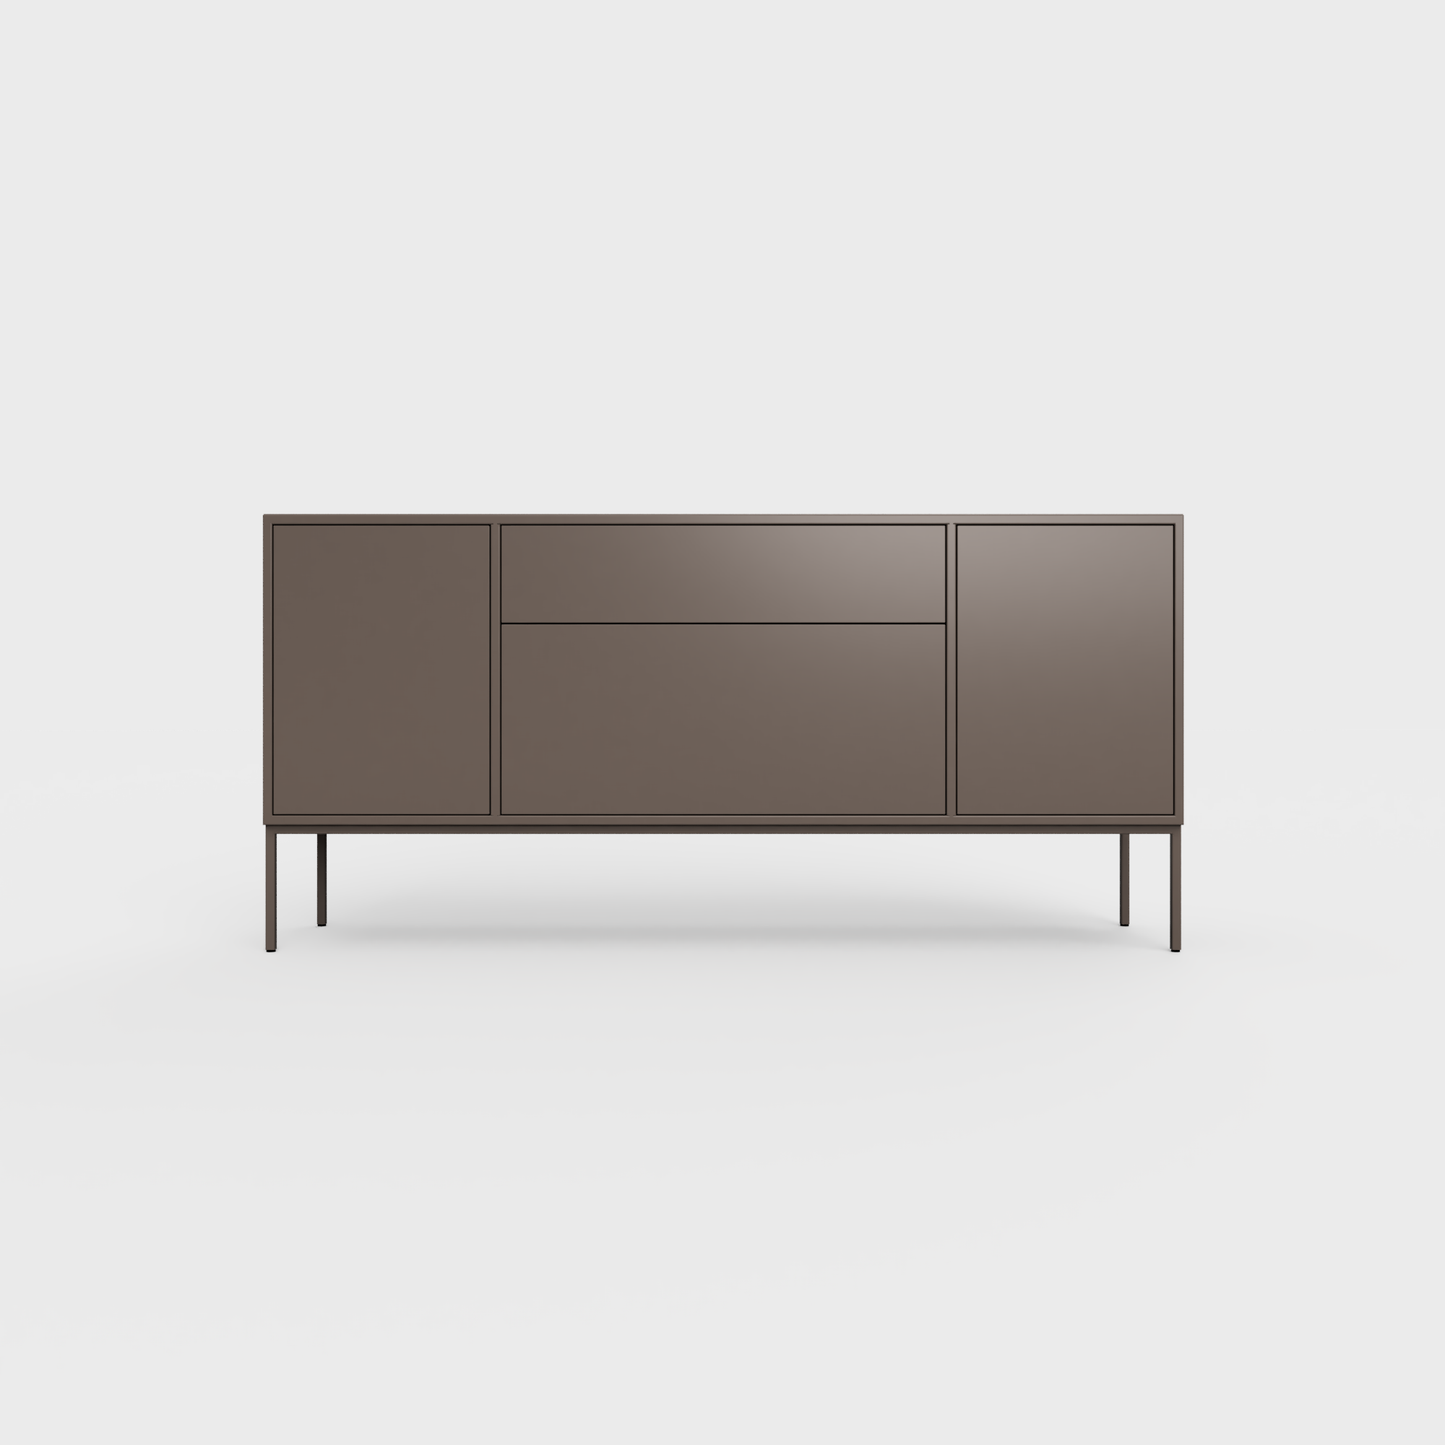 Arnika 02 Sideboard in Earth color, powder-coated steel, elegant and modern piece of furniture for your living room